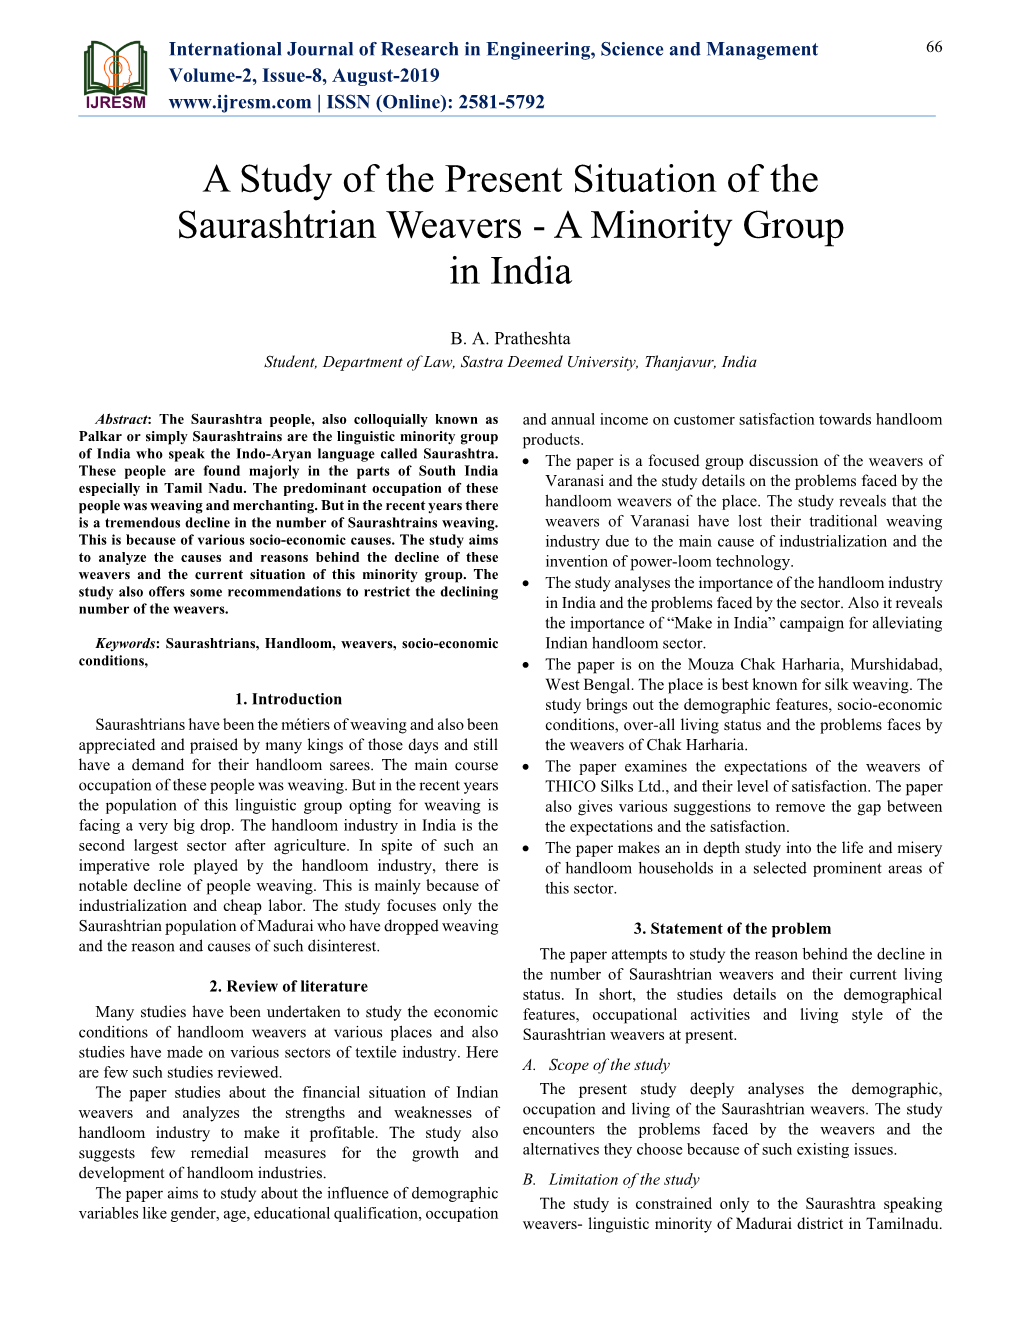 A Study of the Present Situation of the Saurashtrian Weavers - a Minority Group in India